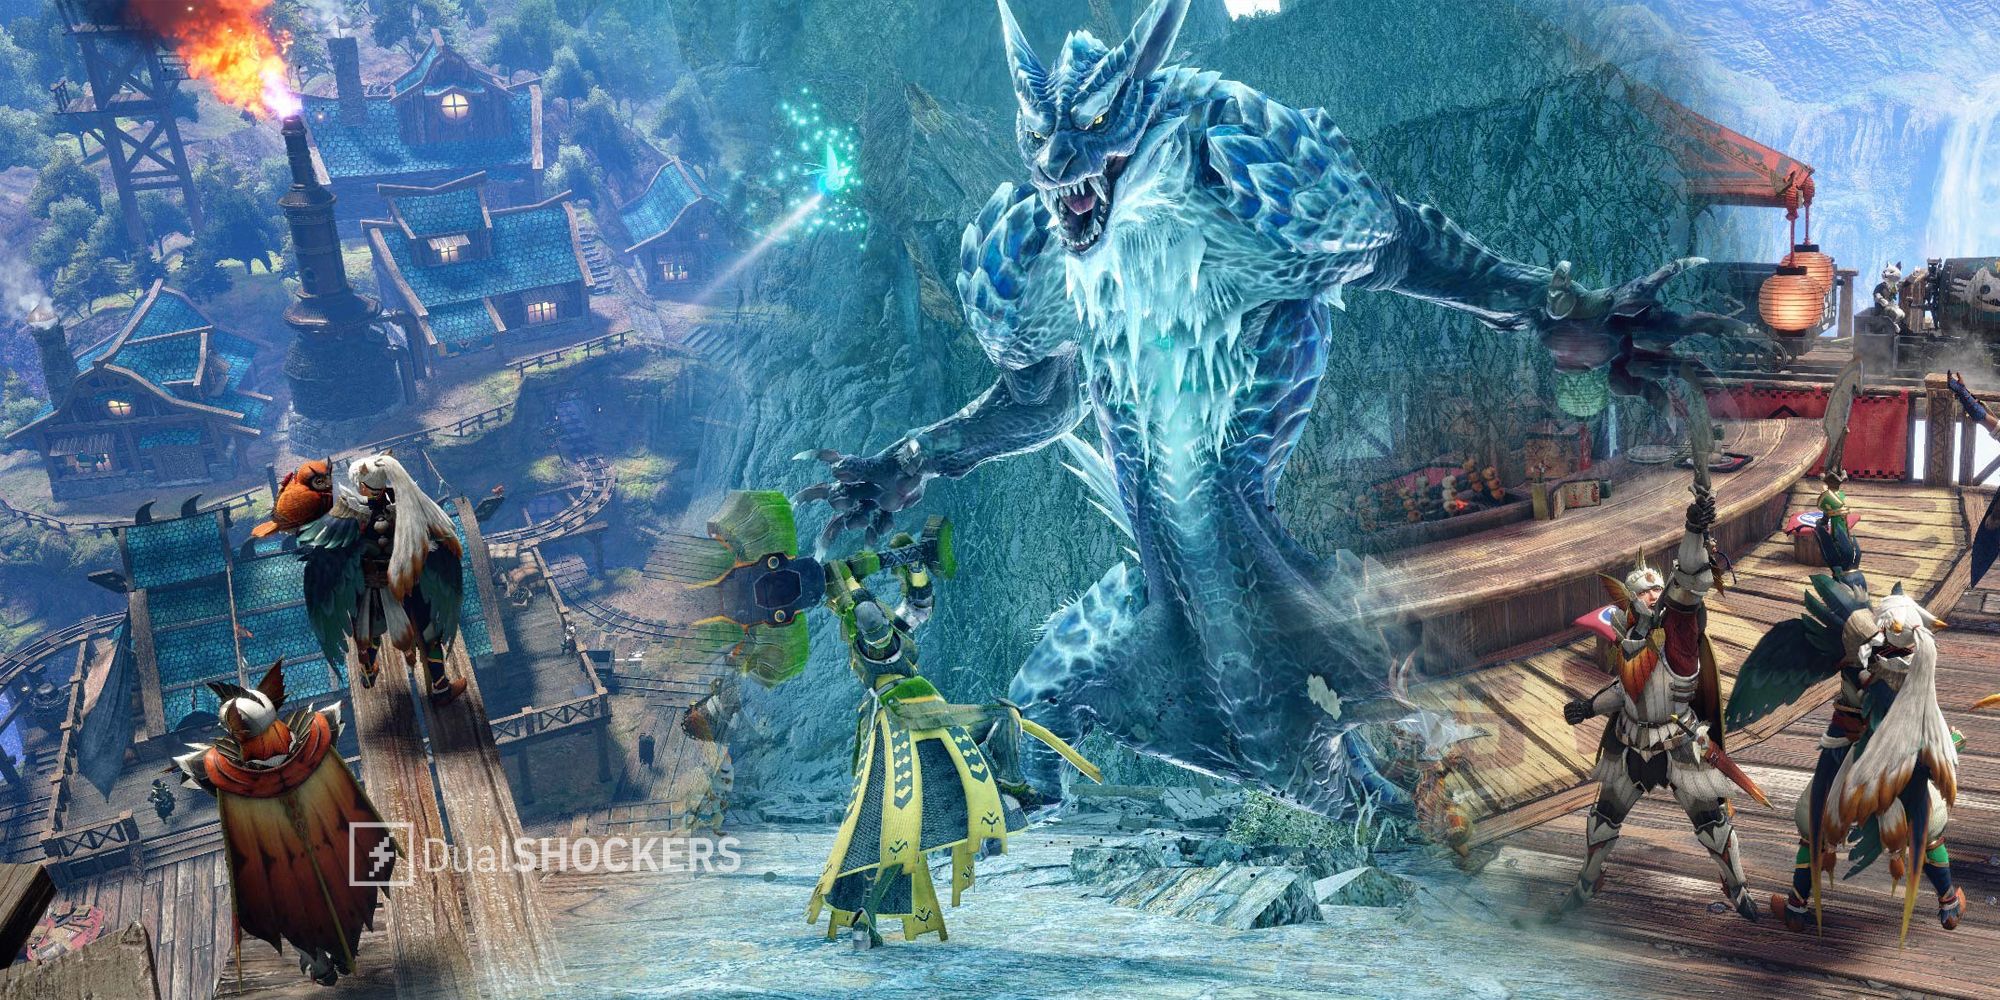 Monster Hunter Rise Is Coming to PlayStation and Xbox